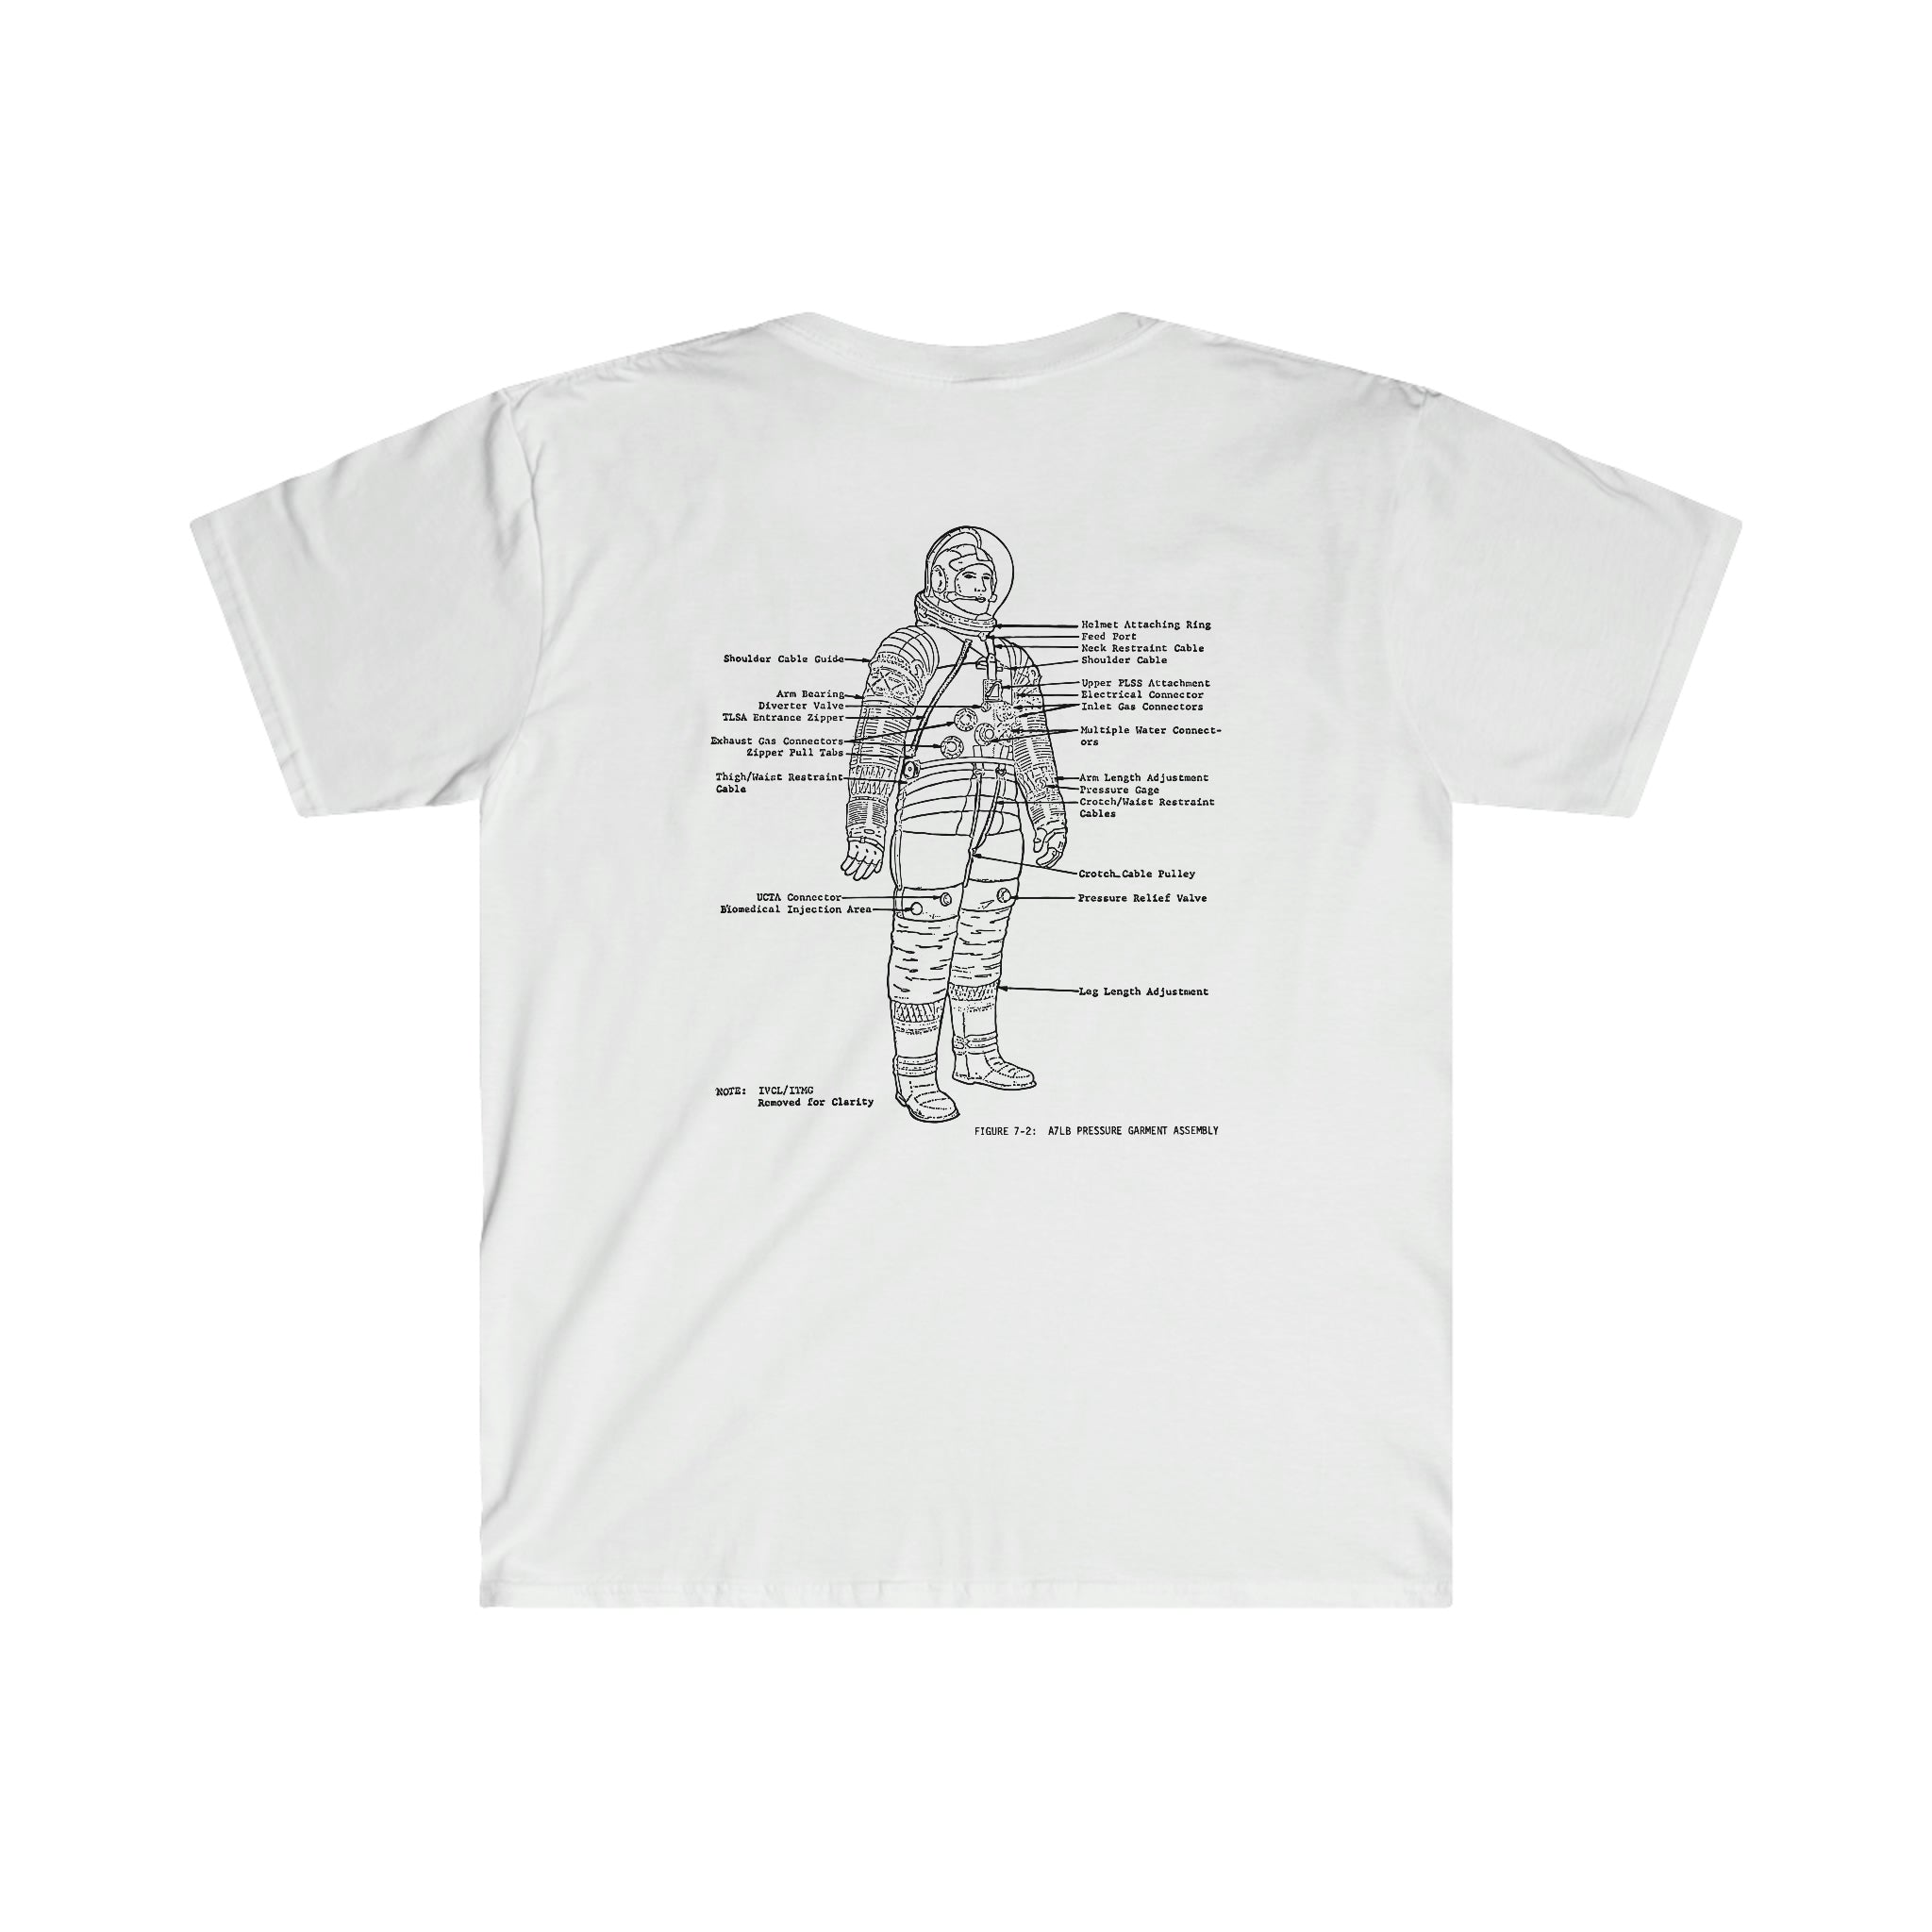 A white Save Me From Space T-Shirt depicting an illustration of a space suit, perfect for space enthusiasts or those seeking to save themselves from the vastness of outer space.